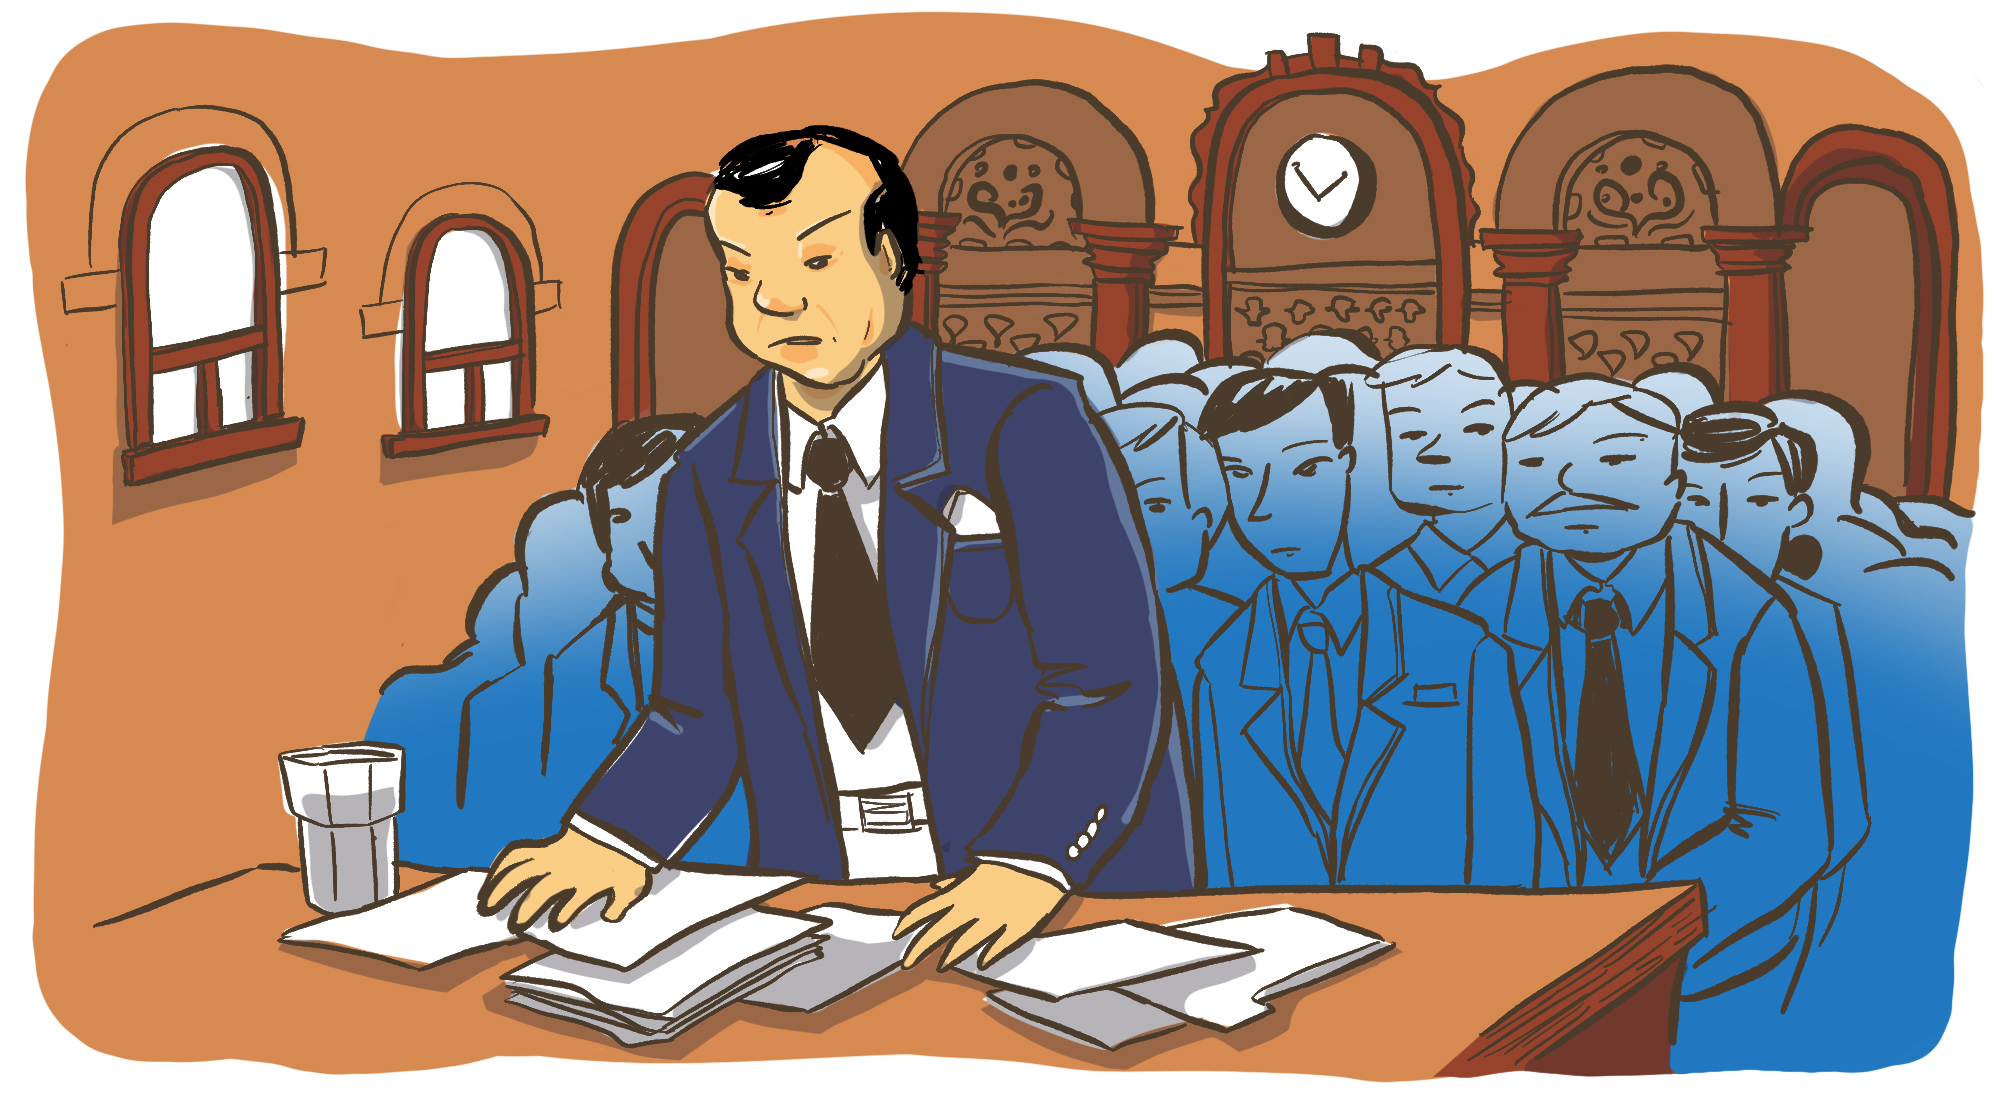 An illustration of K. Dock Yip in court, repealing the Chinese Exclusion Act. K. Dock Yip is depicted standing in the middle of the image wearing a suit, with several document in front of him. Behind him sit a group of people that represent the repealing committee. The background is wooden arches of a court room.